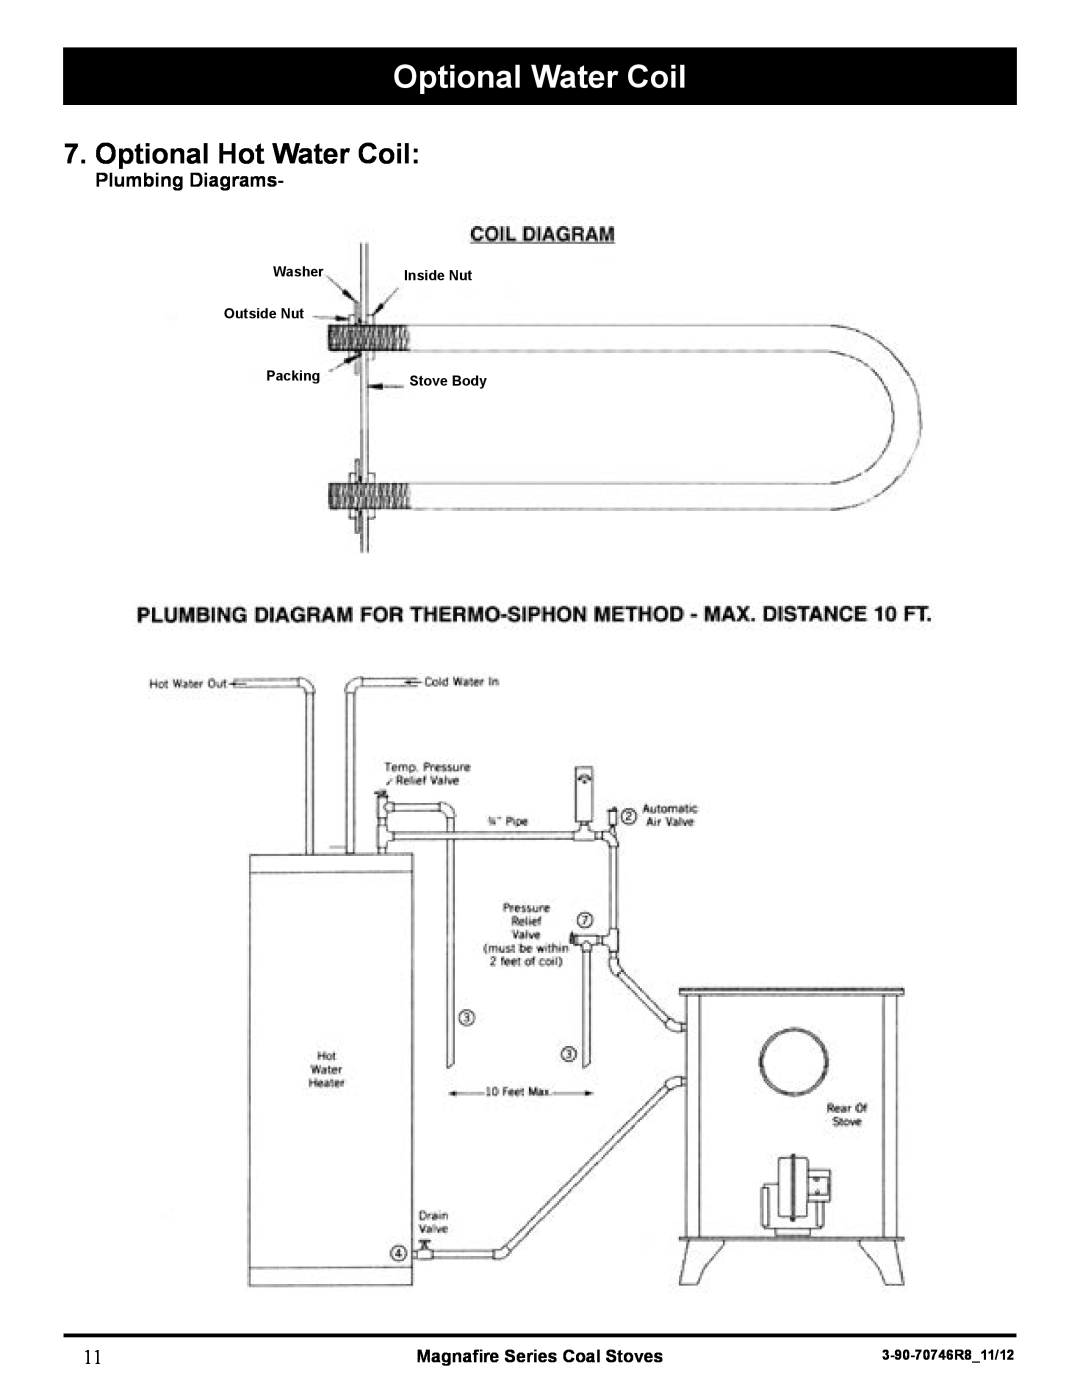 Harman Stove Company MARK III Optional Water Coil, Optional Hot Water Coil, Plumbing Diagrams, Inside Nut, Stove Body 